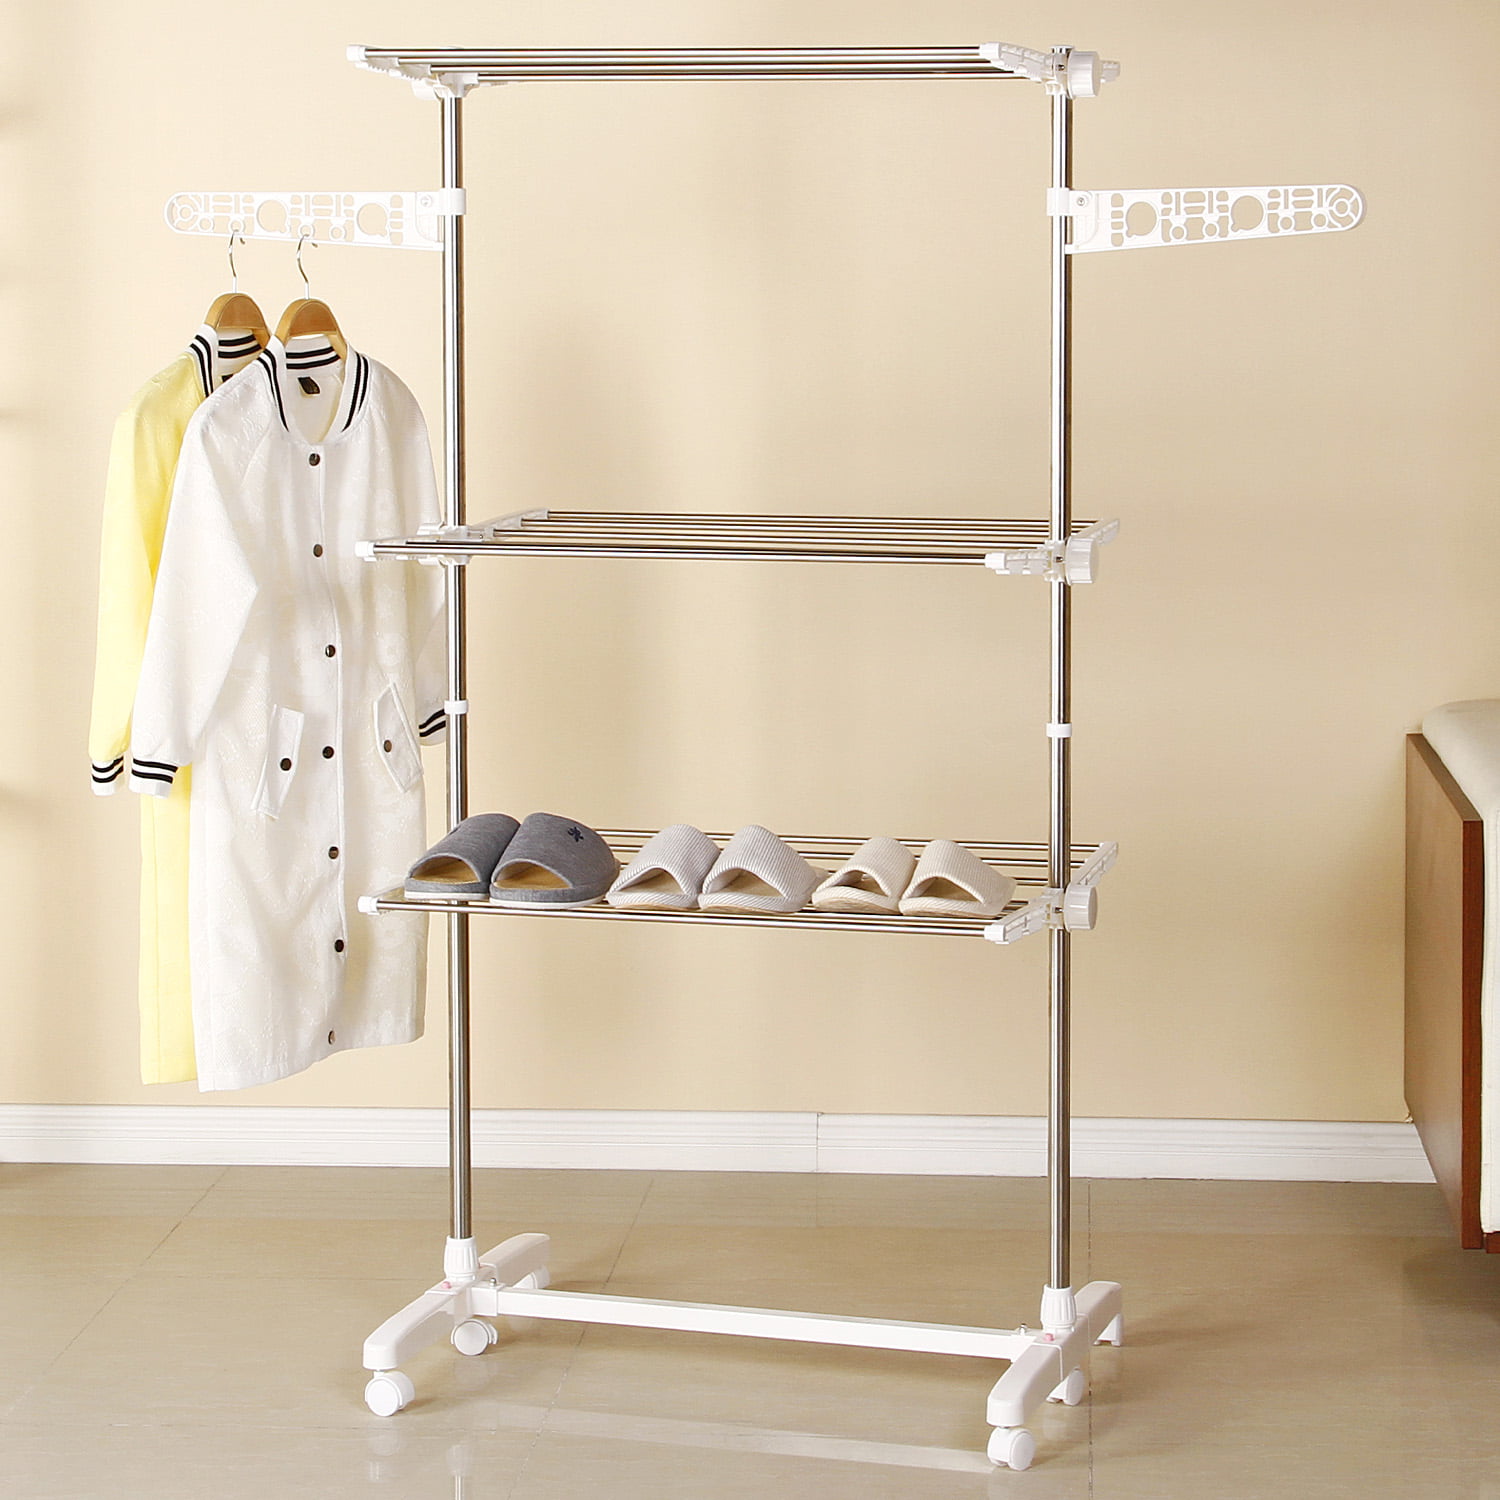 Mllieroo Folding Rolling Laundry Rack 3-Tier Clothes Drying Rack with Stainless Steel Laundry Drying Rack